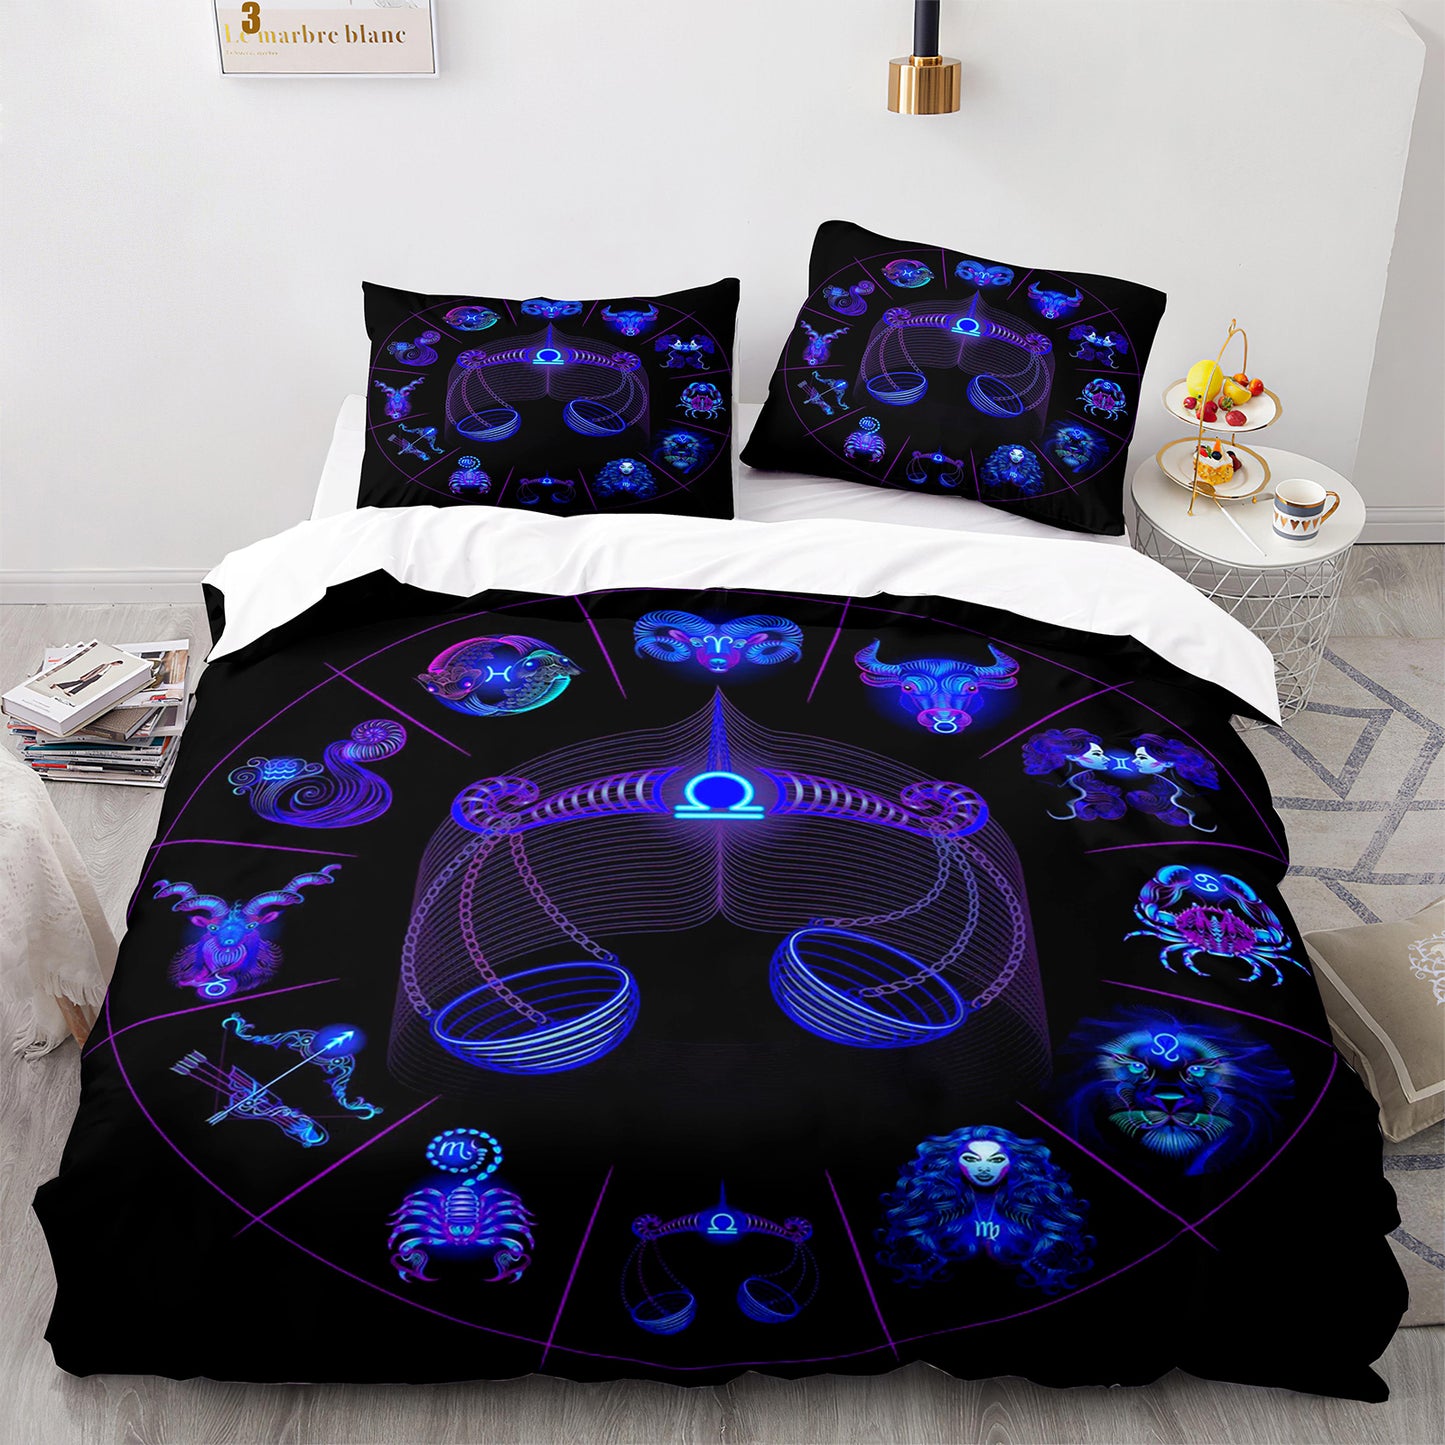 Cutom Duvet Cover Set Pattern Chic Comforter Cover King Size for Teens Adults Bedding Set with Pillowcases  SEXZ3009